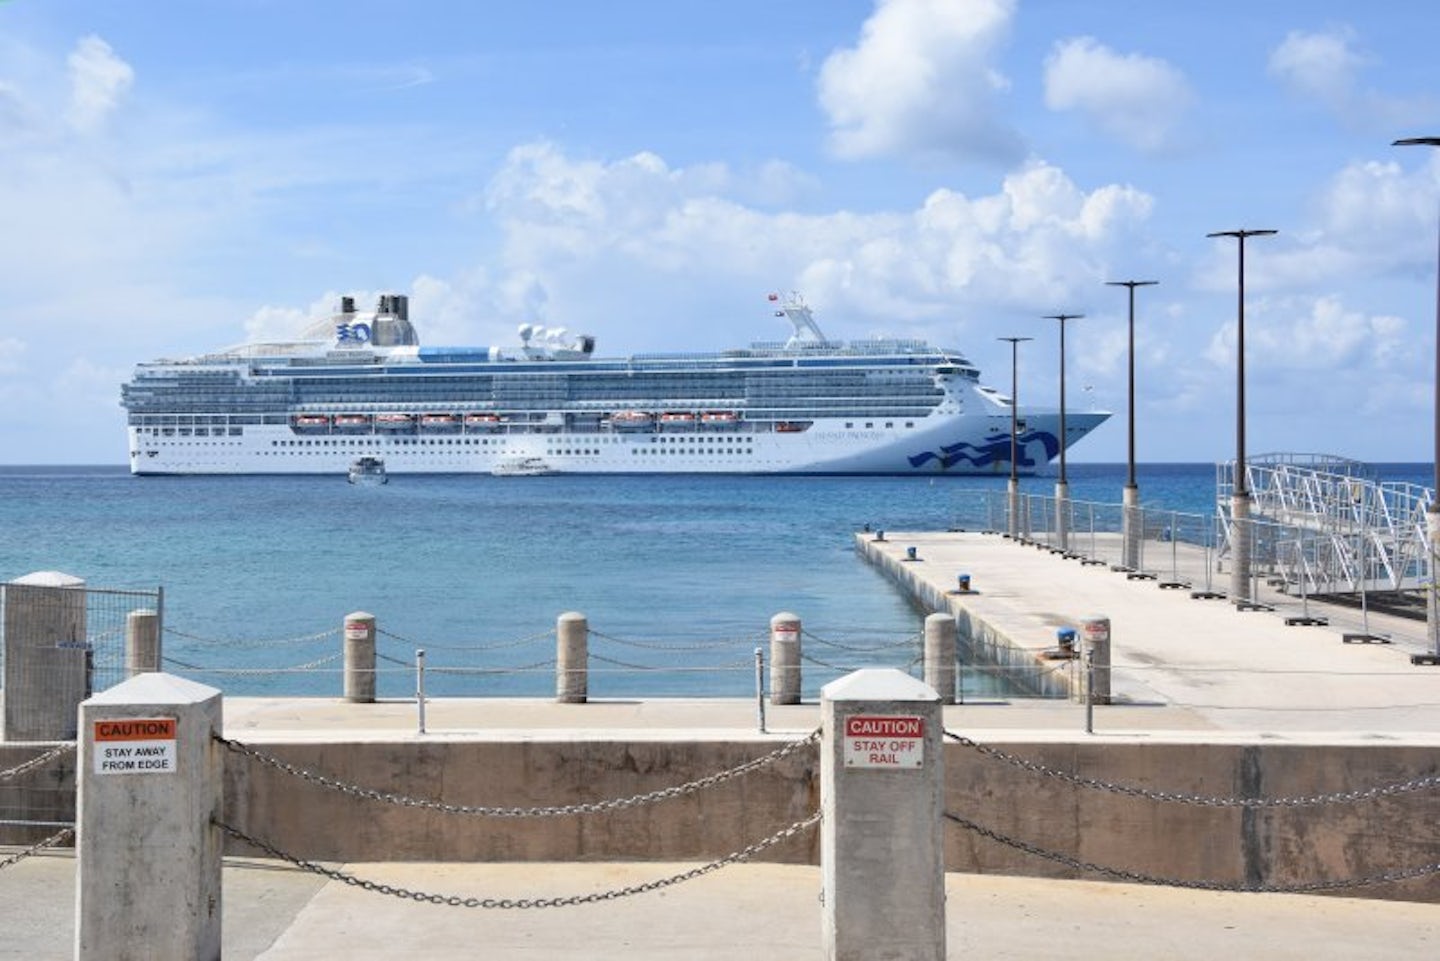 Our ship, the Island Princess, in the harbor at Grand Cayman.